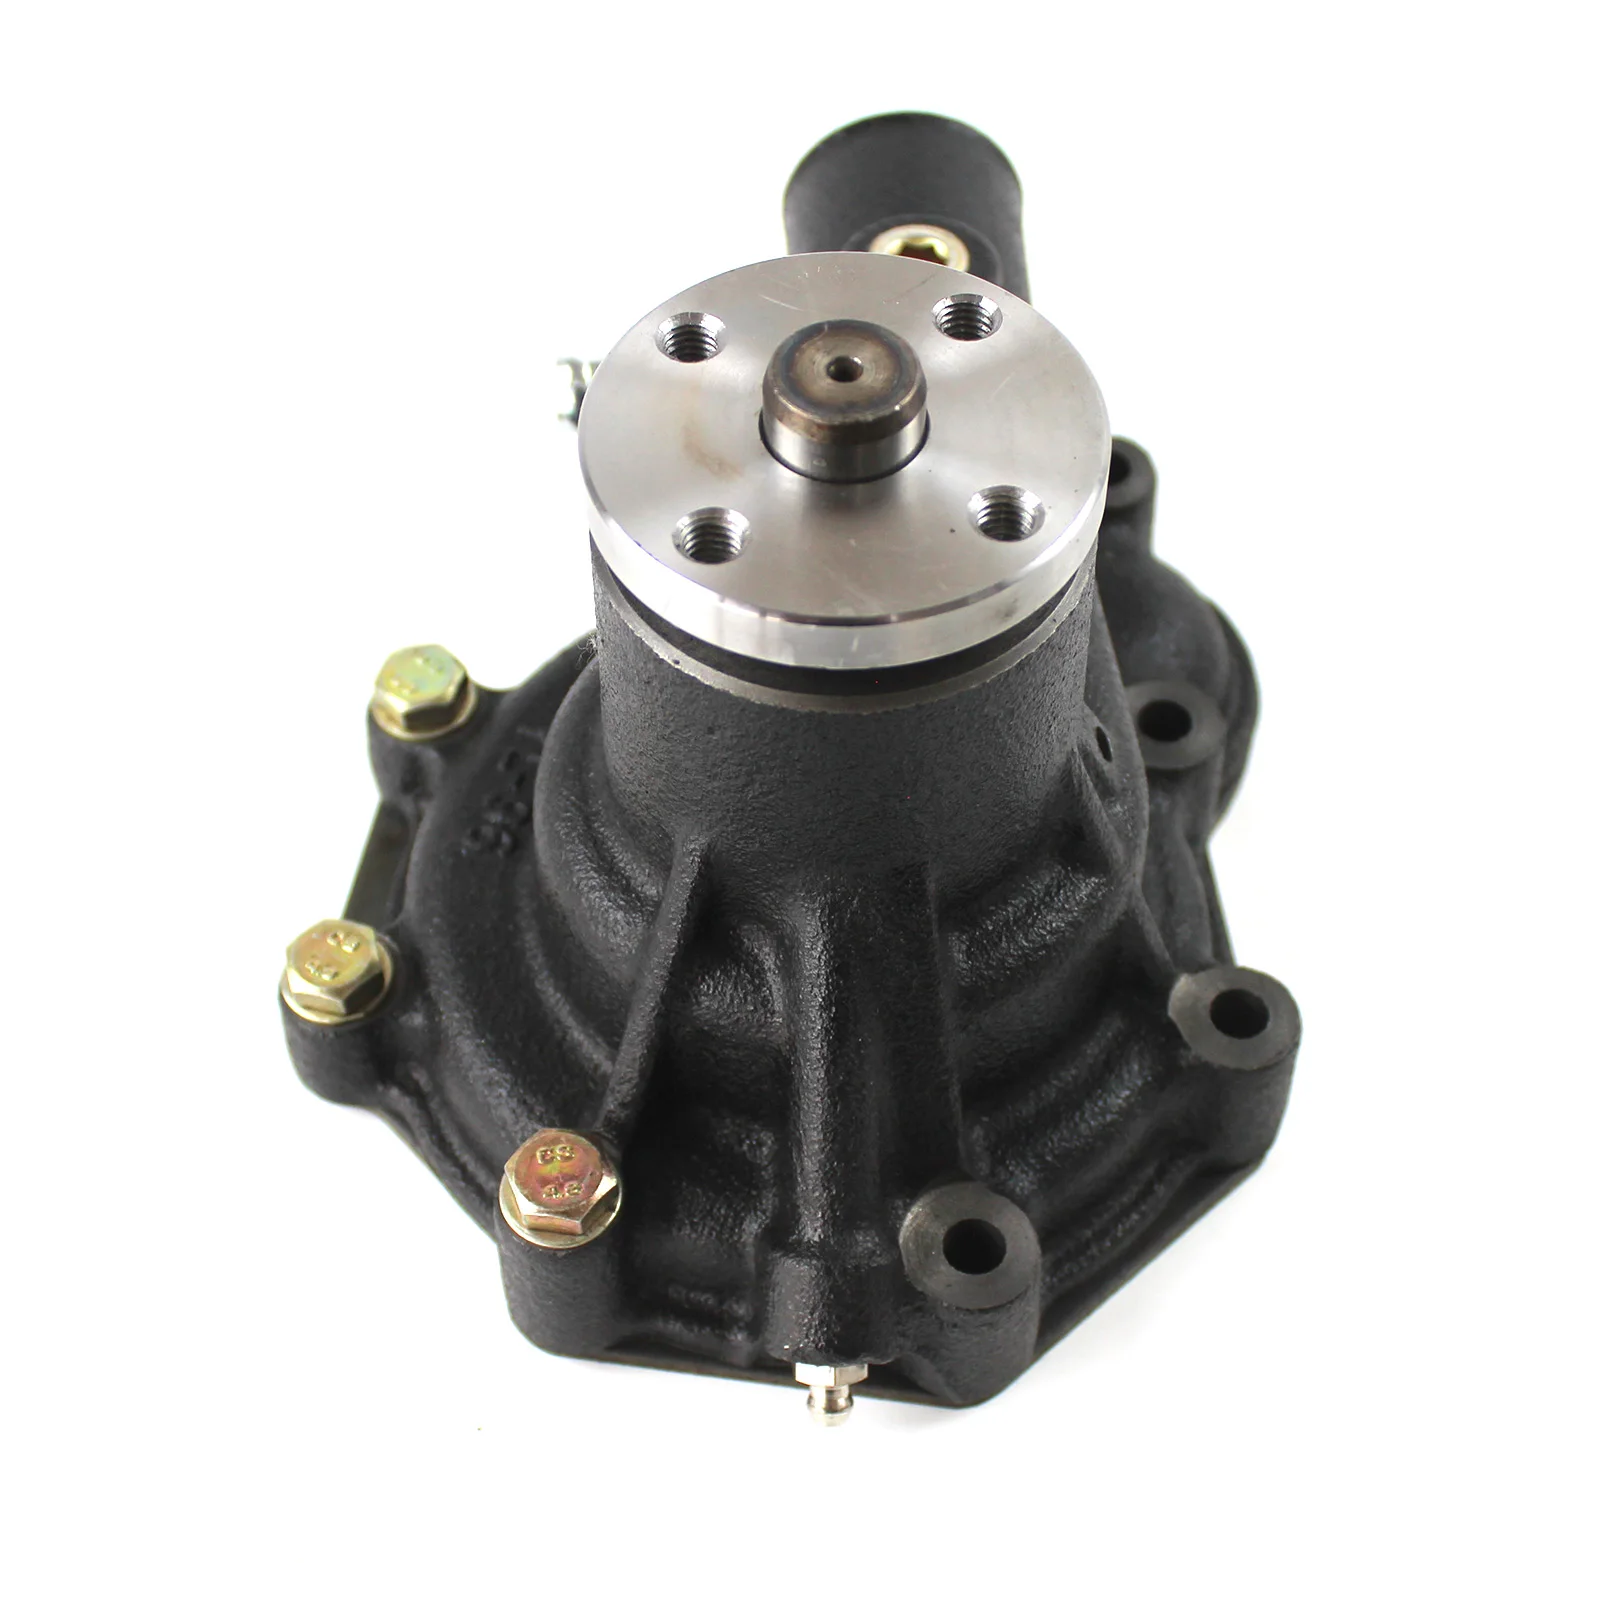 

Water Pump MP10552 MP10431 MP10431 804C-33 804D-33T 804D-33 804C-33T S4S UE35138 UE35139 UE35140 UE35243 for Perkins